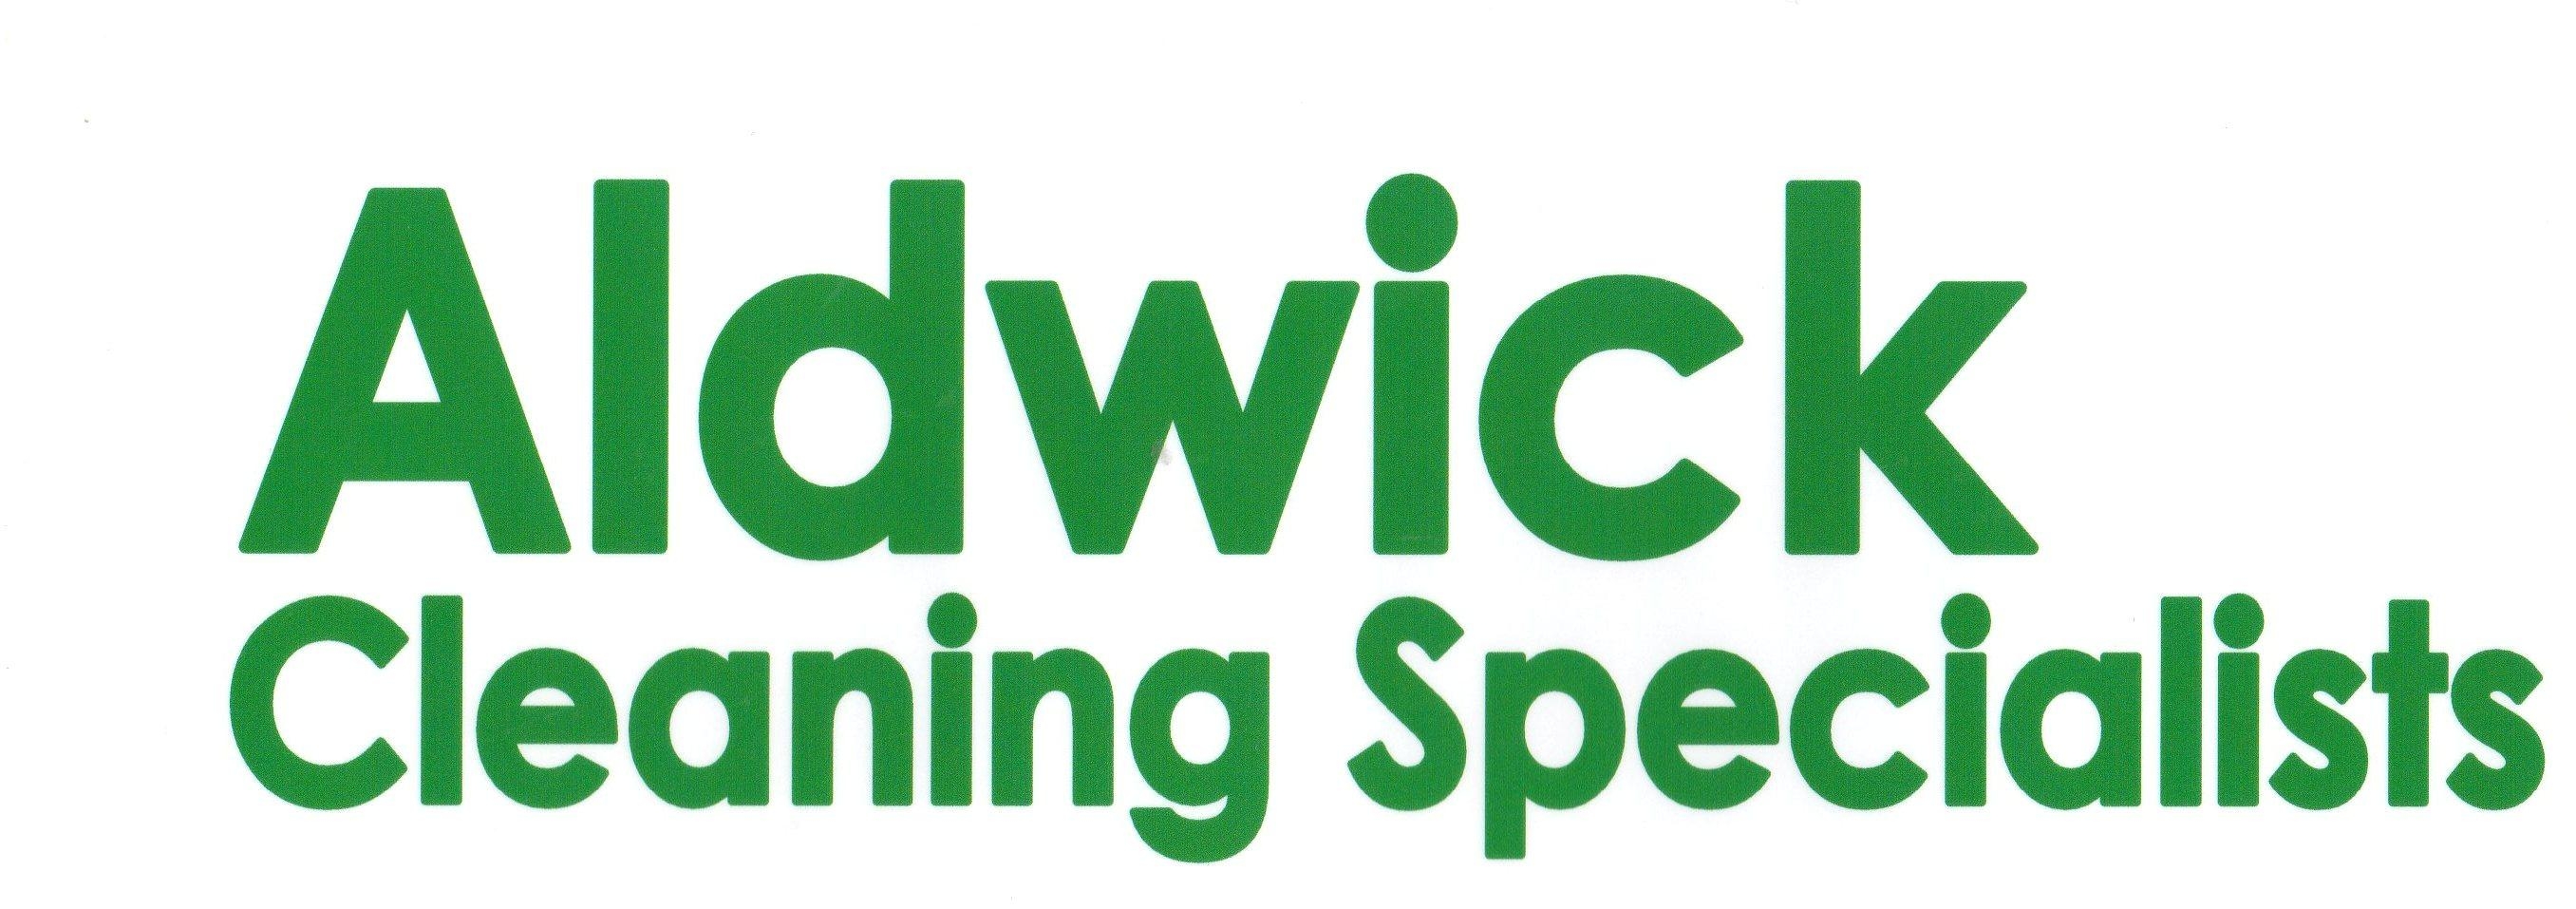 Aldwick Cleaning Specialists